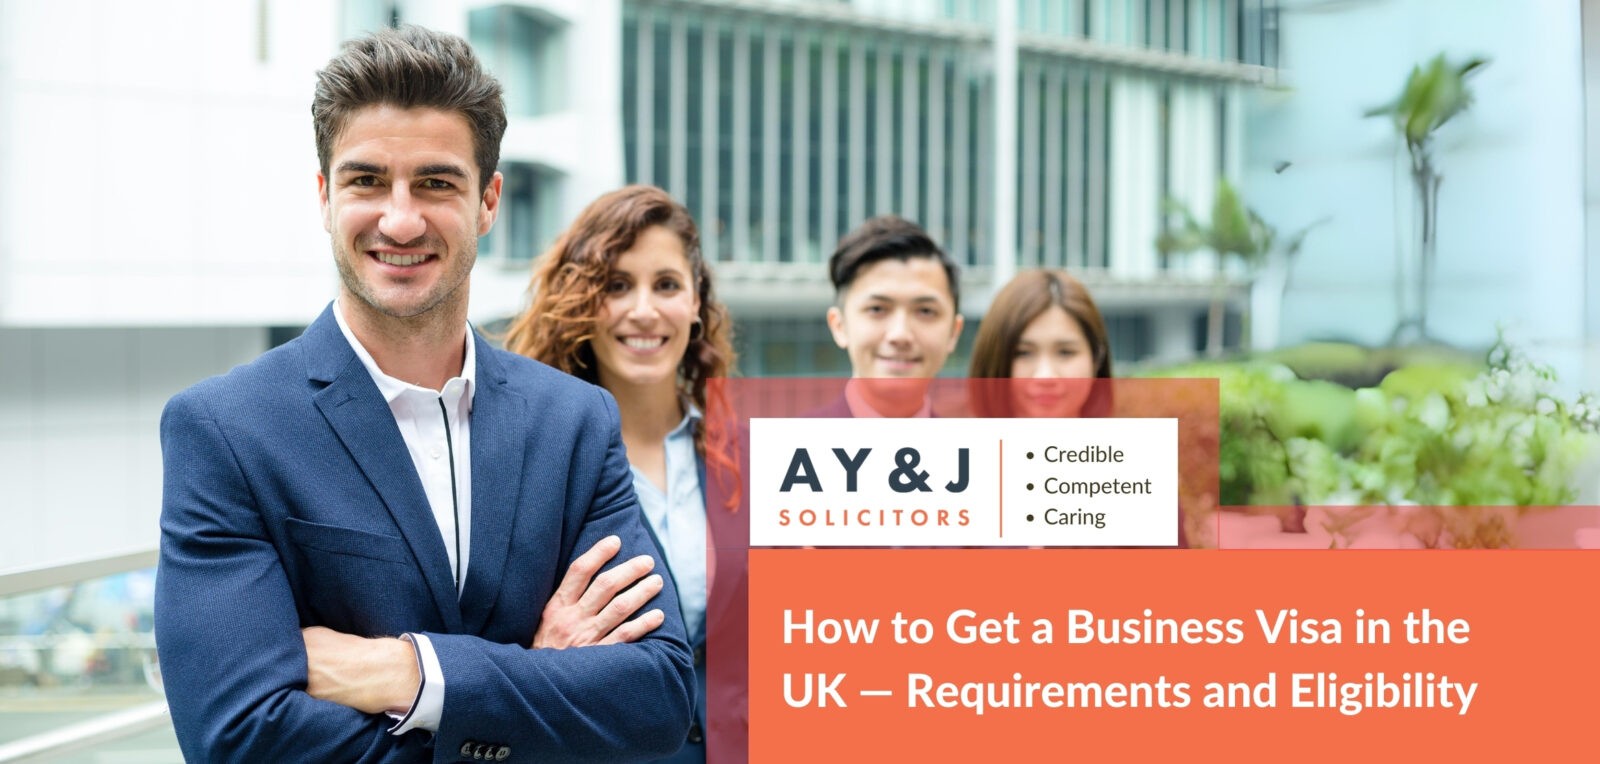 How to Get a Business Visa in the UK —Requirements and Eligibility 